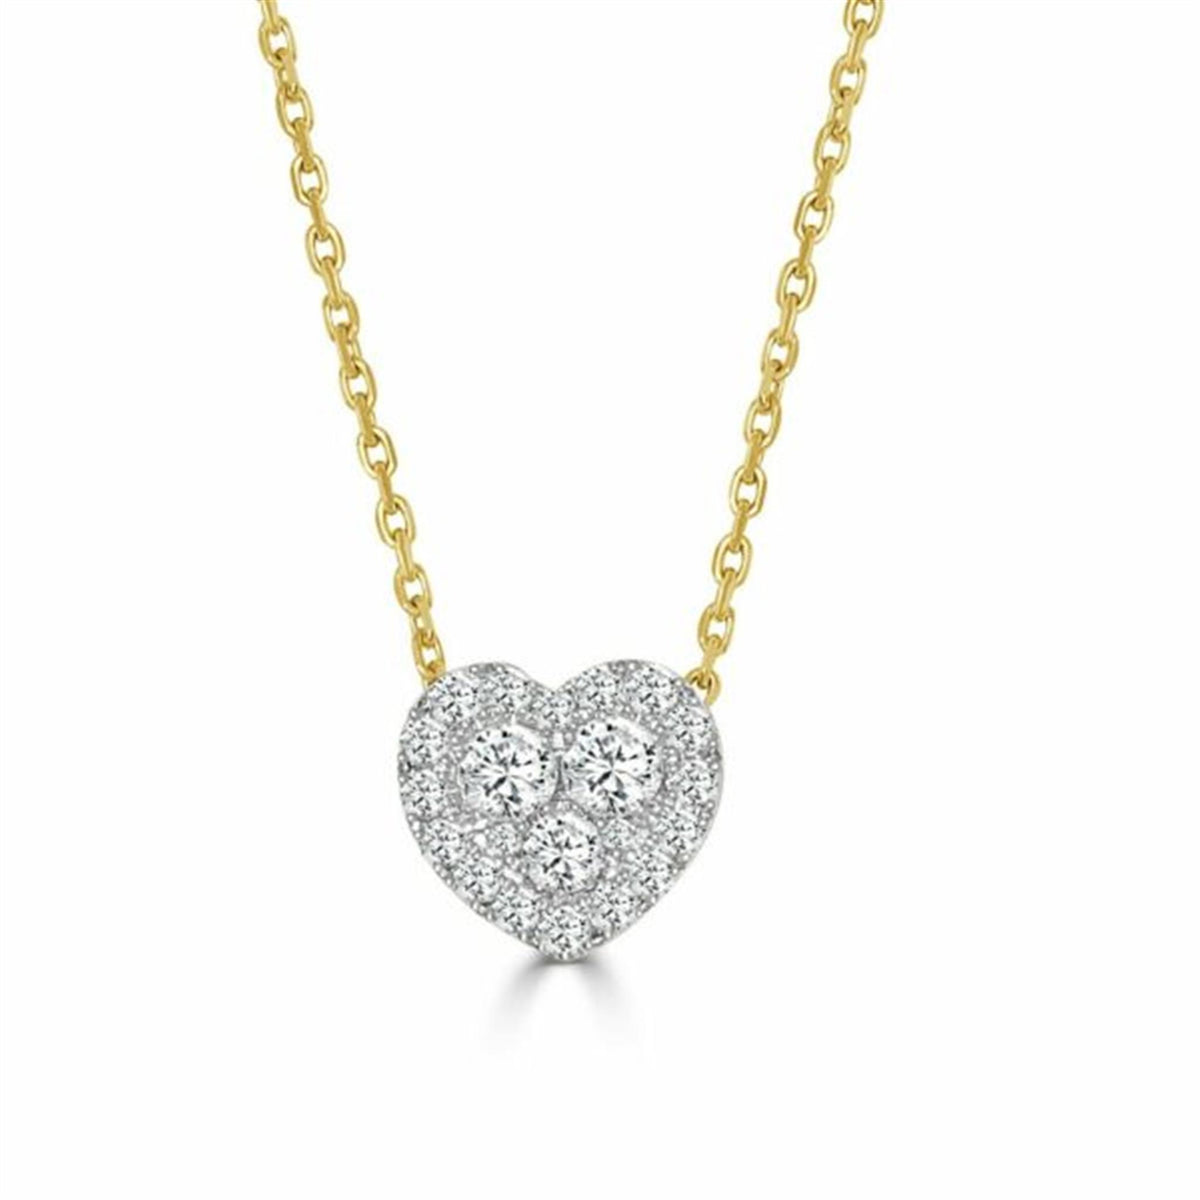 Frederic Sage 14Kt Yellow & White Gold Heart Pendant With 0.31ct Diamonds